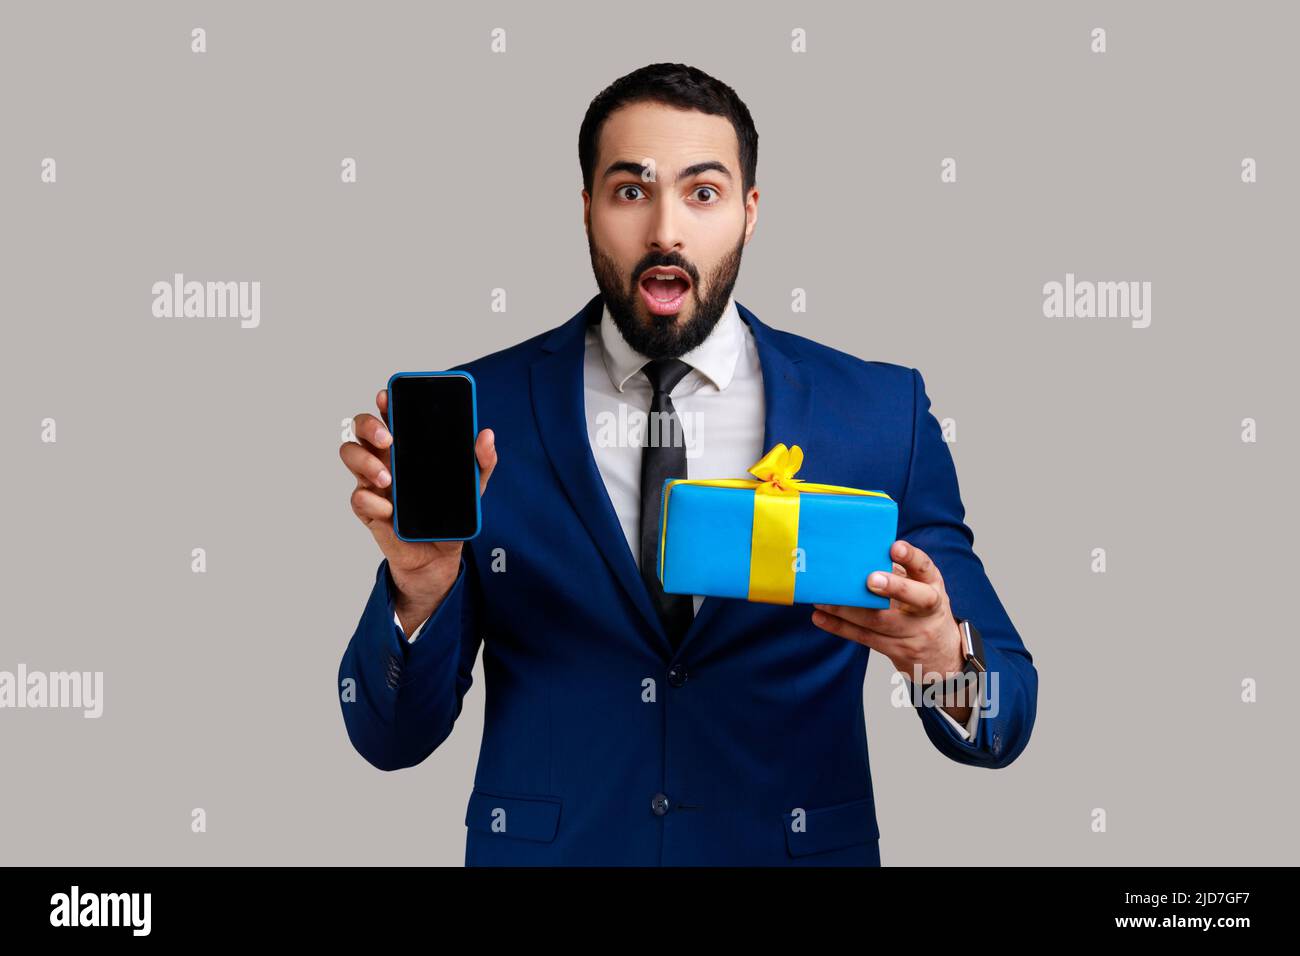 Shocked businessman holding gift box and cell phone with empty display for online shopping advertising, wearing official style suit. Indoor studio shot isolated on gray background. Stock Photo